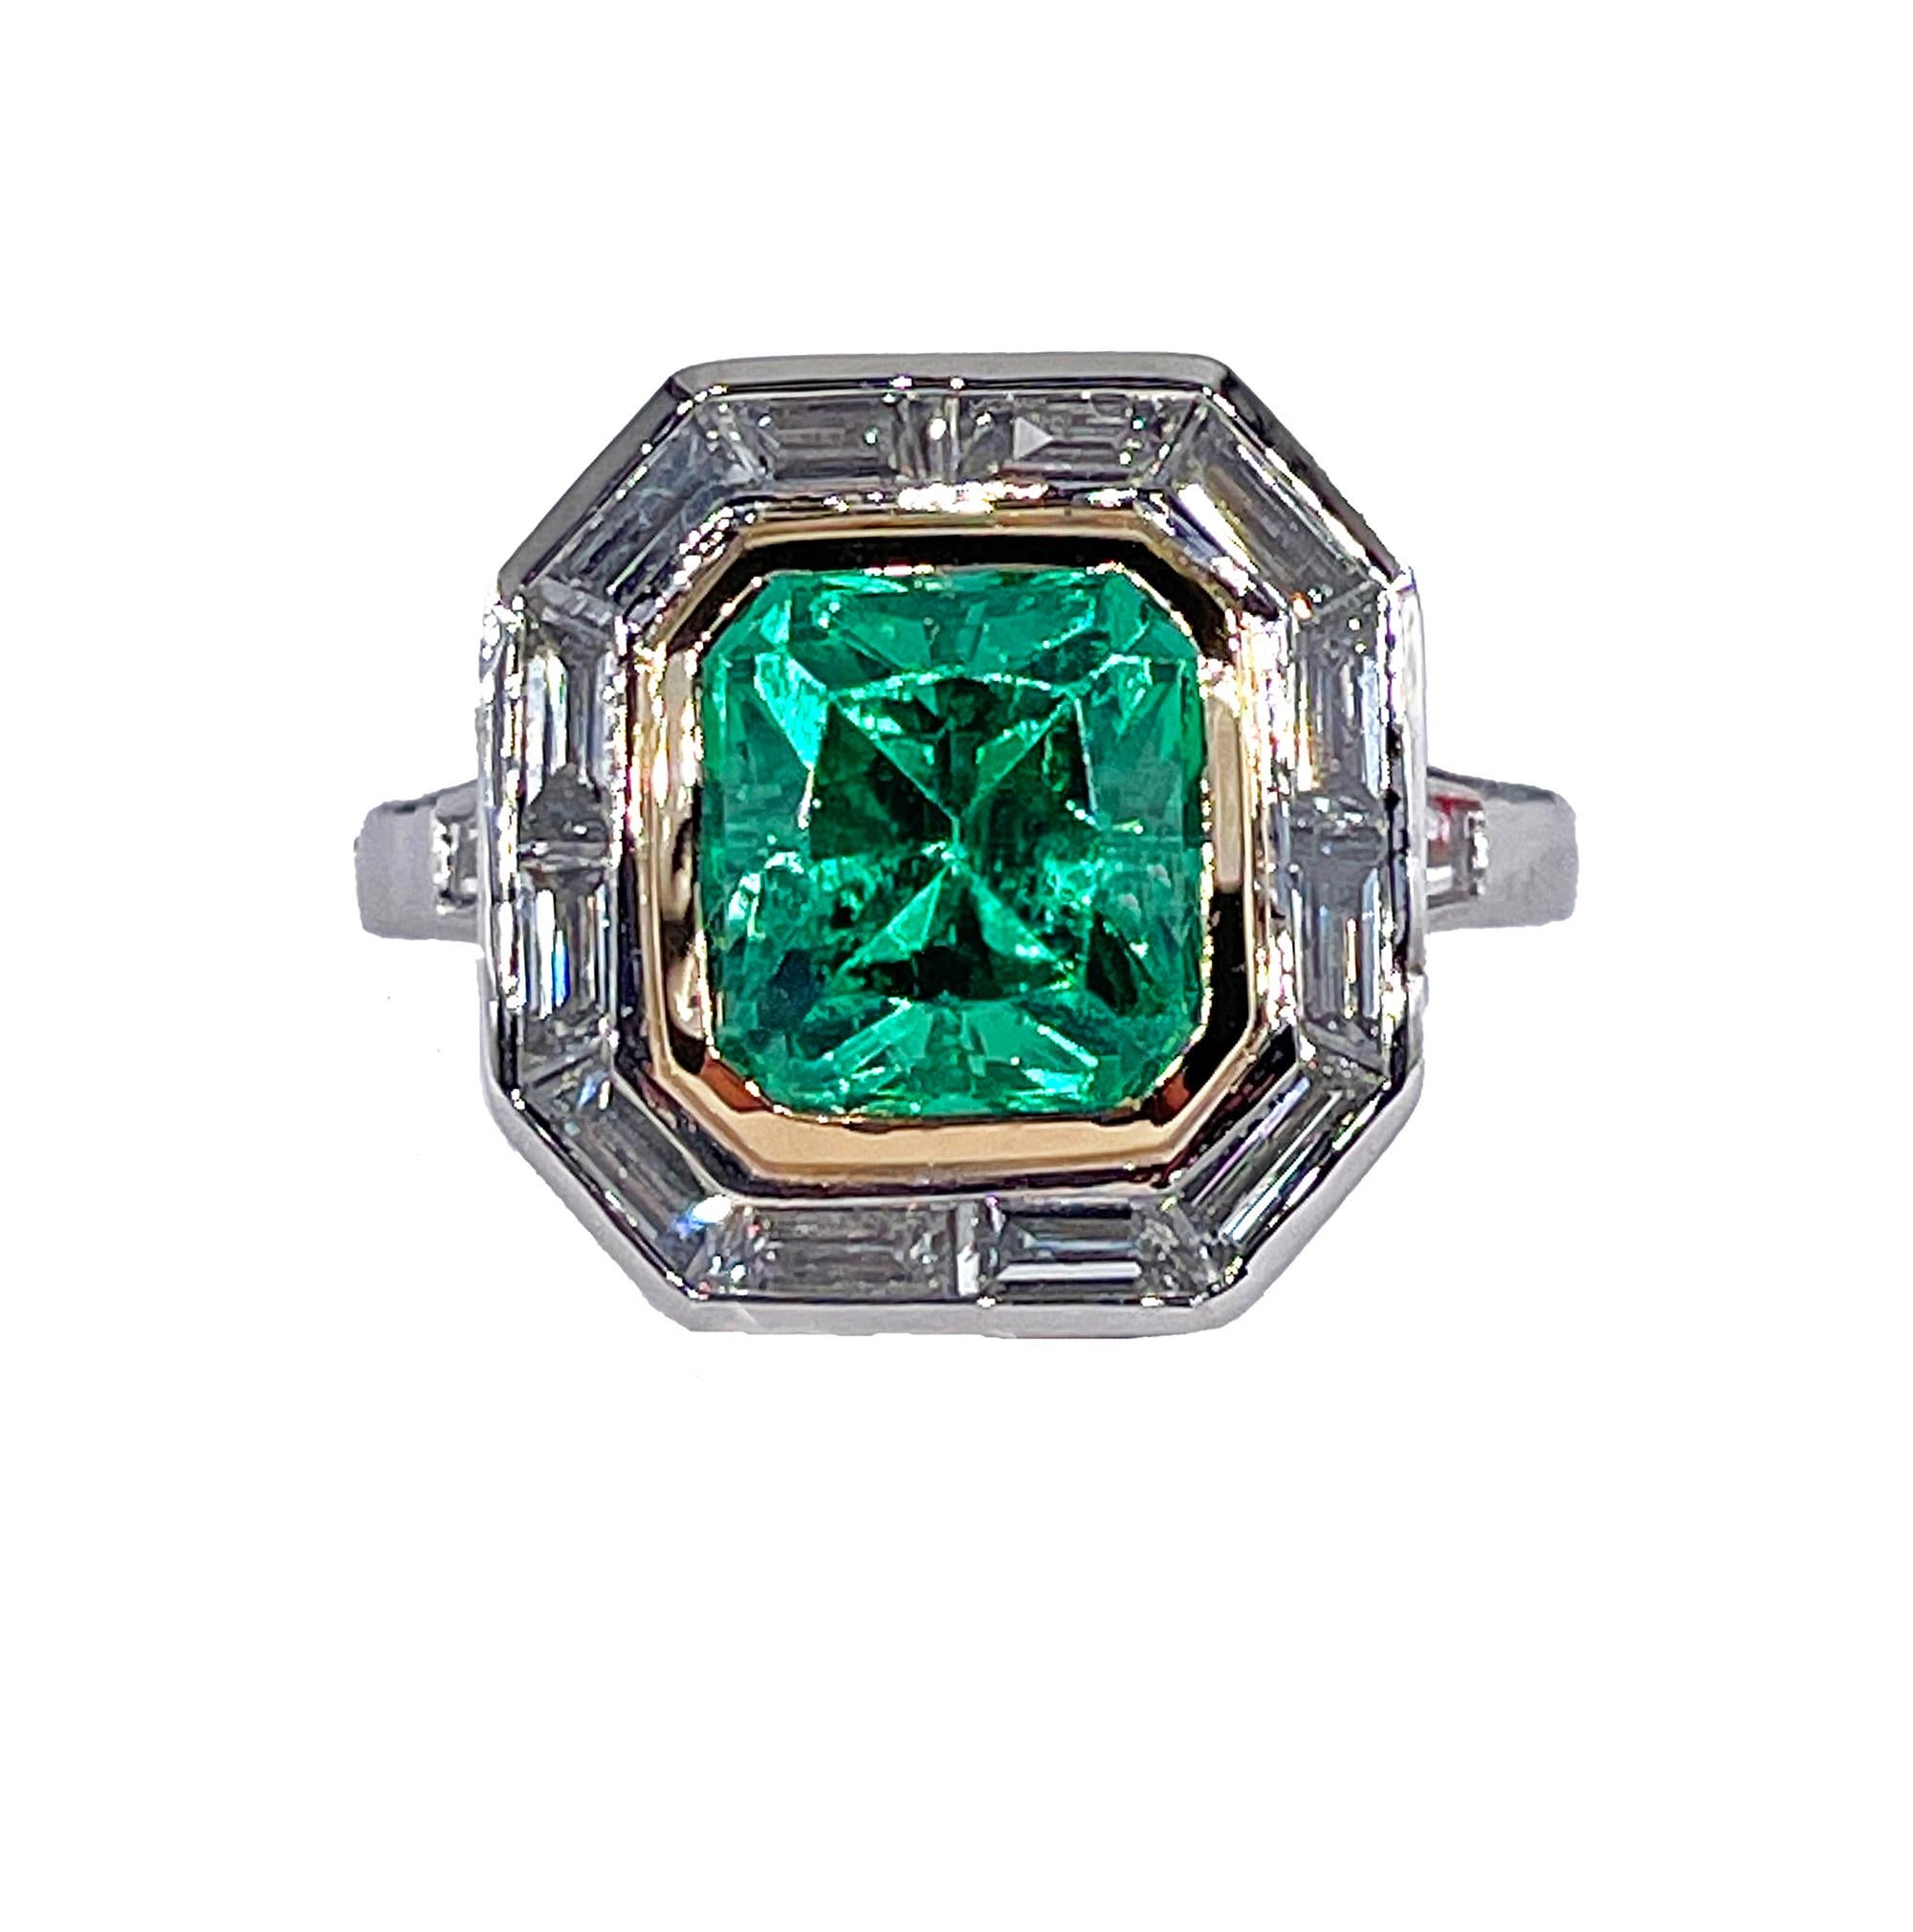  AGL Insignificant VVS 4.66ctw Natural Green Emerald Diamond Platinum 18k Ring For Sale 3